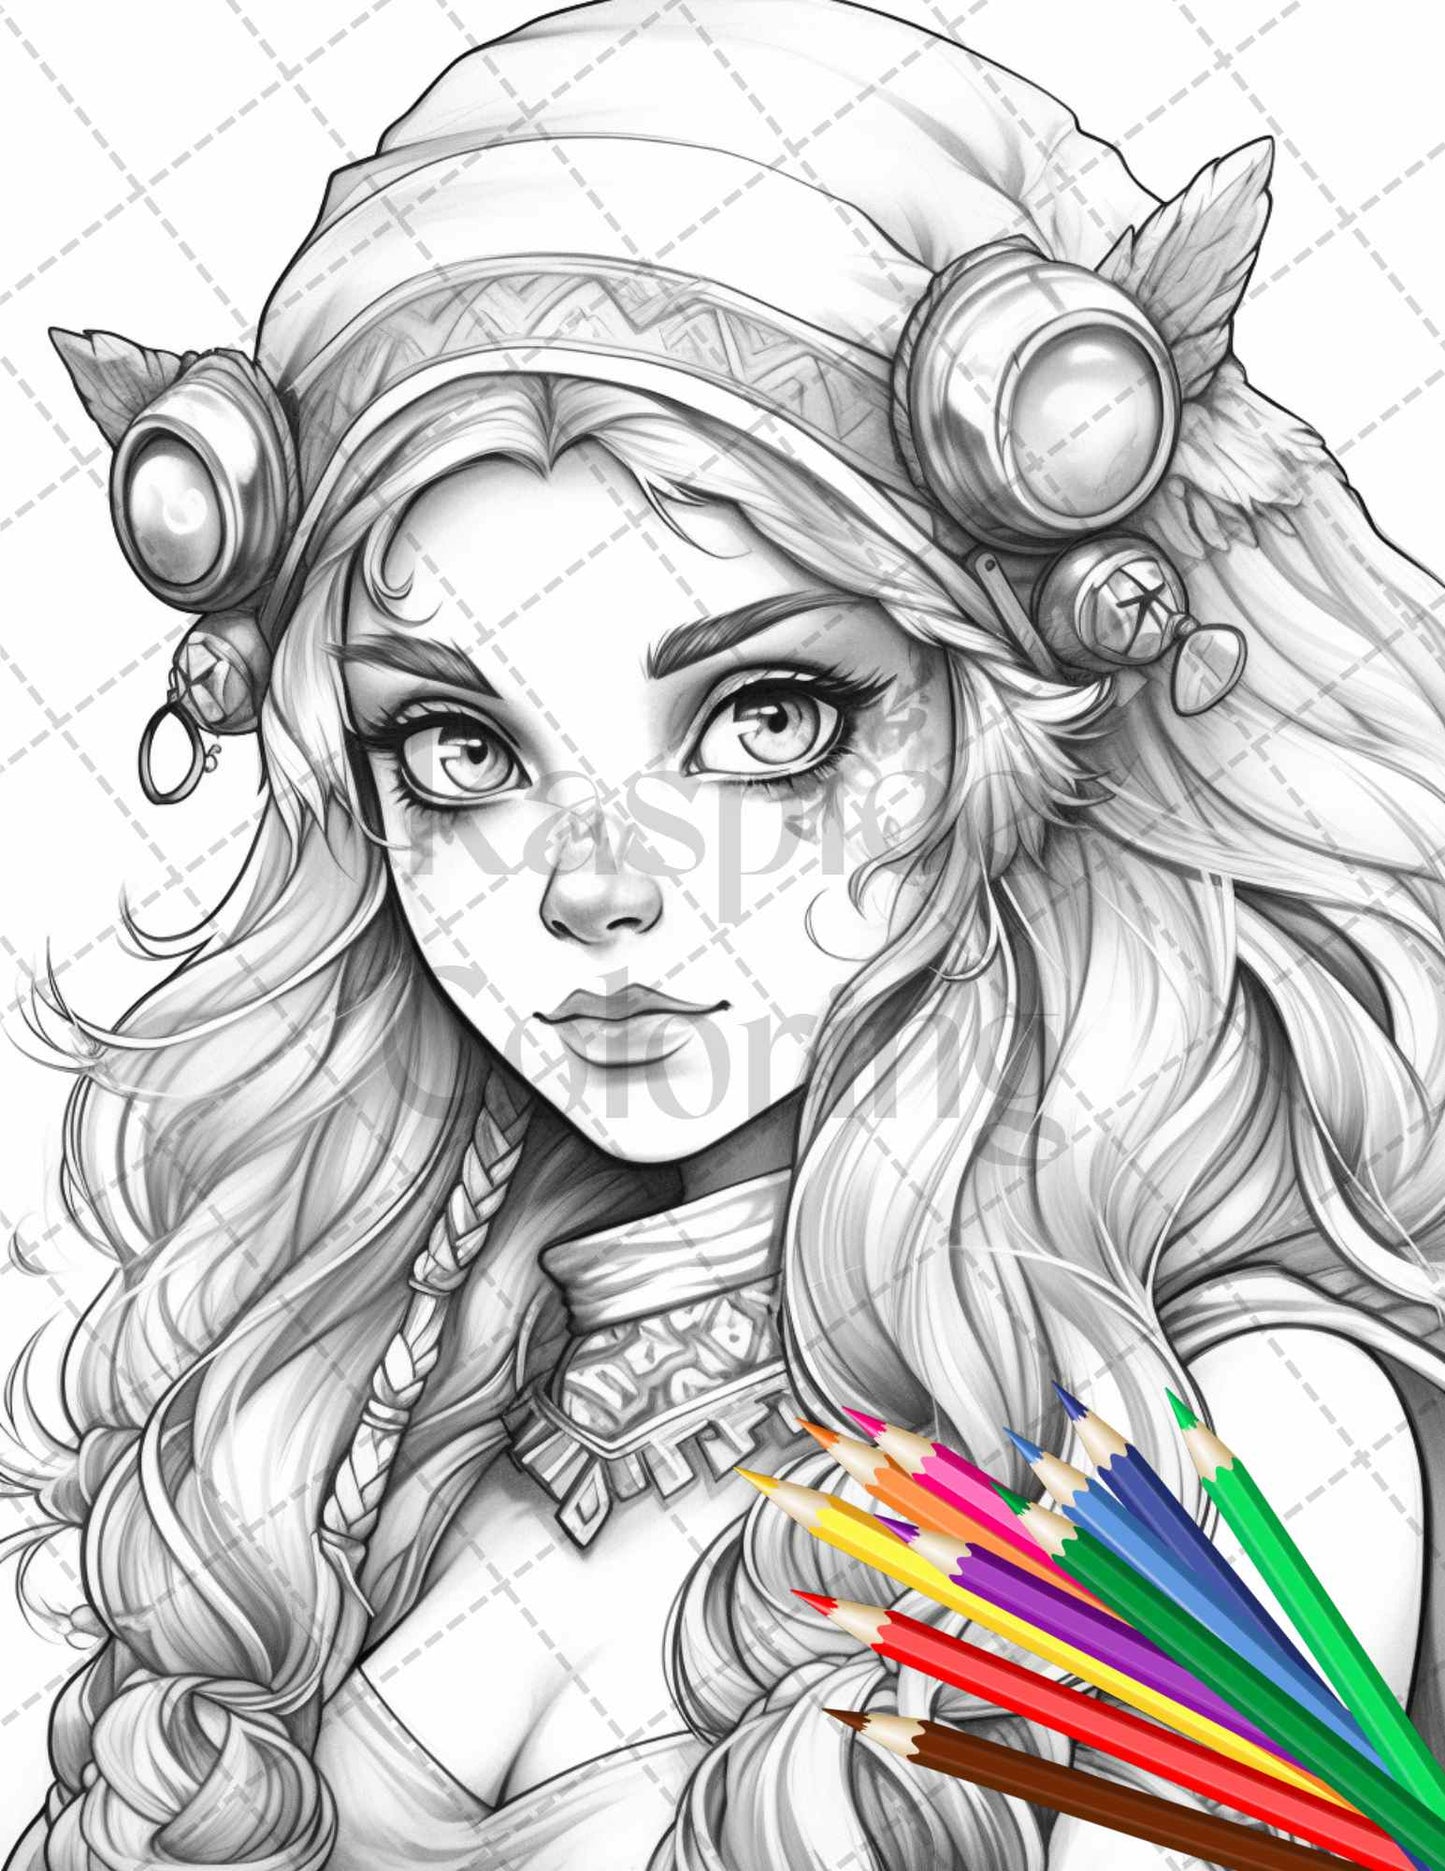 41 Adorable Gnome Girls Grayscale Coloring Pages Printable for Adults and Kids, PDF File Instant Download - raspiee